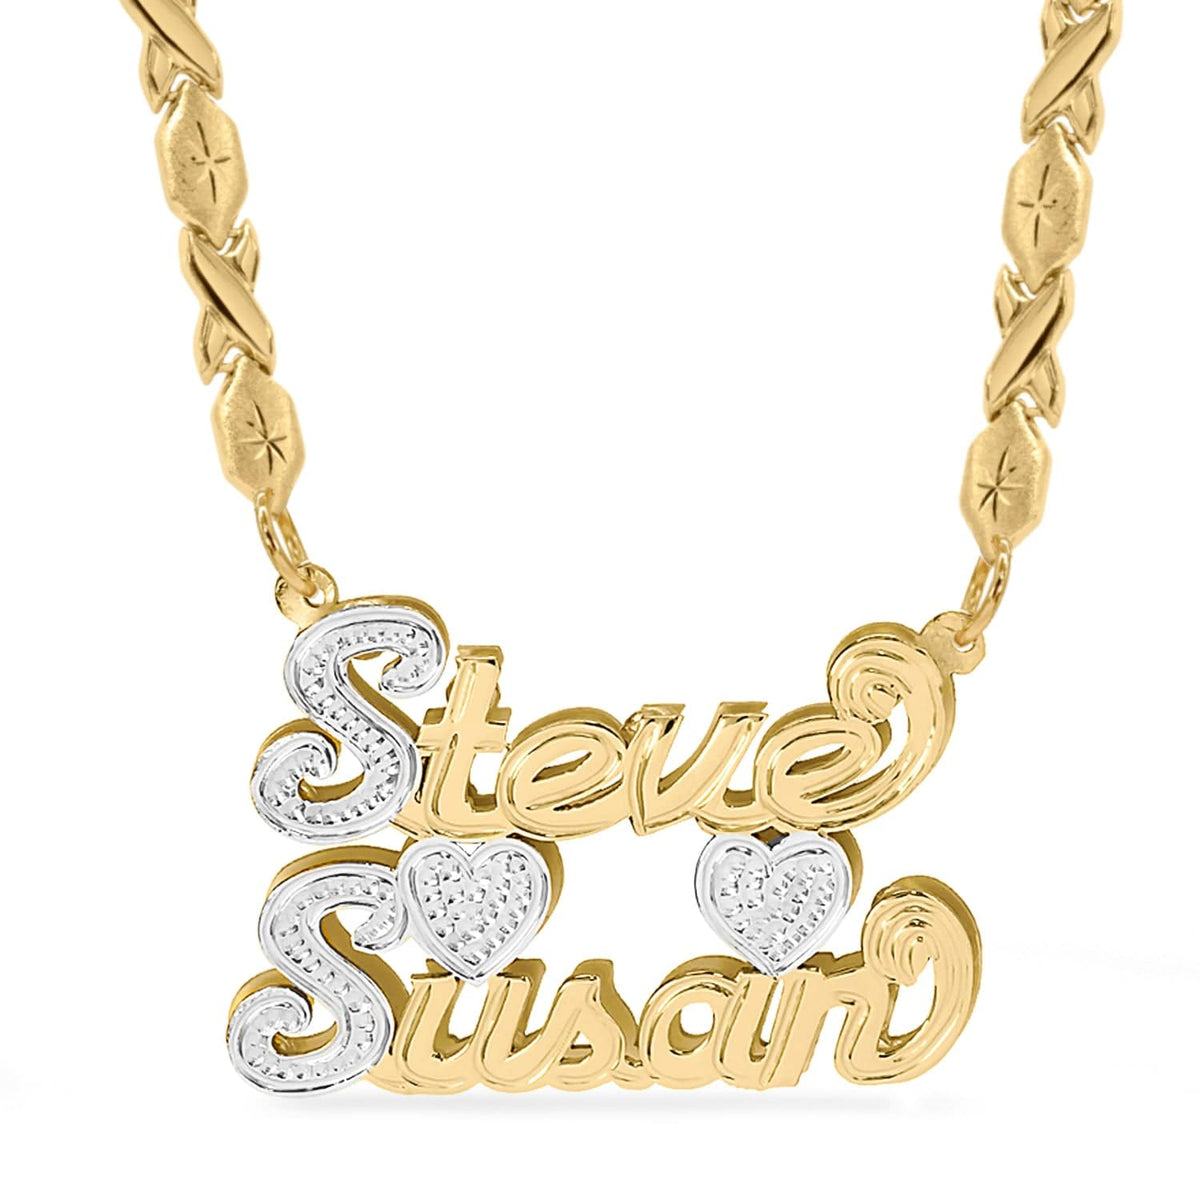 Two-Tone. Sterling Silver / Xoxo Chain Double Plated Couples Name Necklace with Xoxo chain